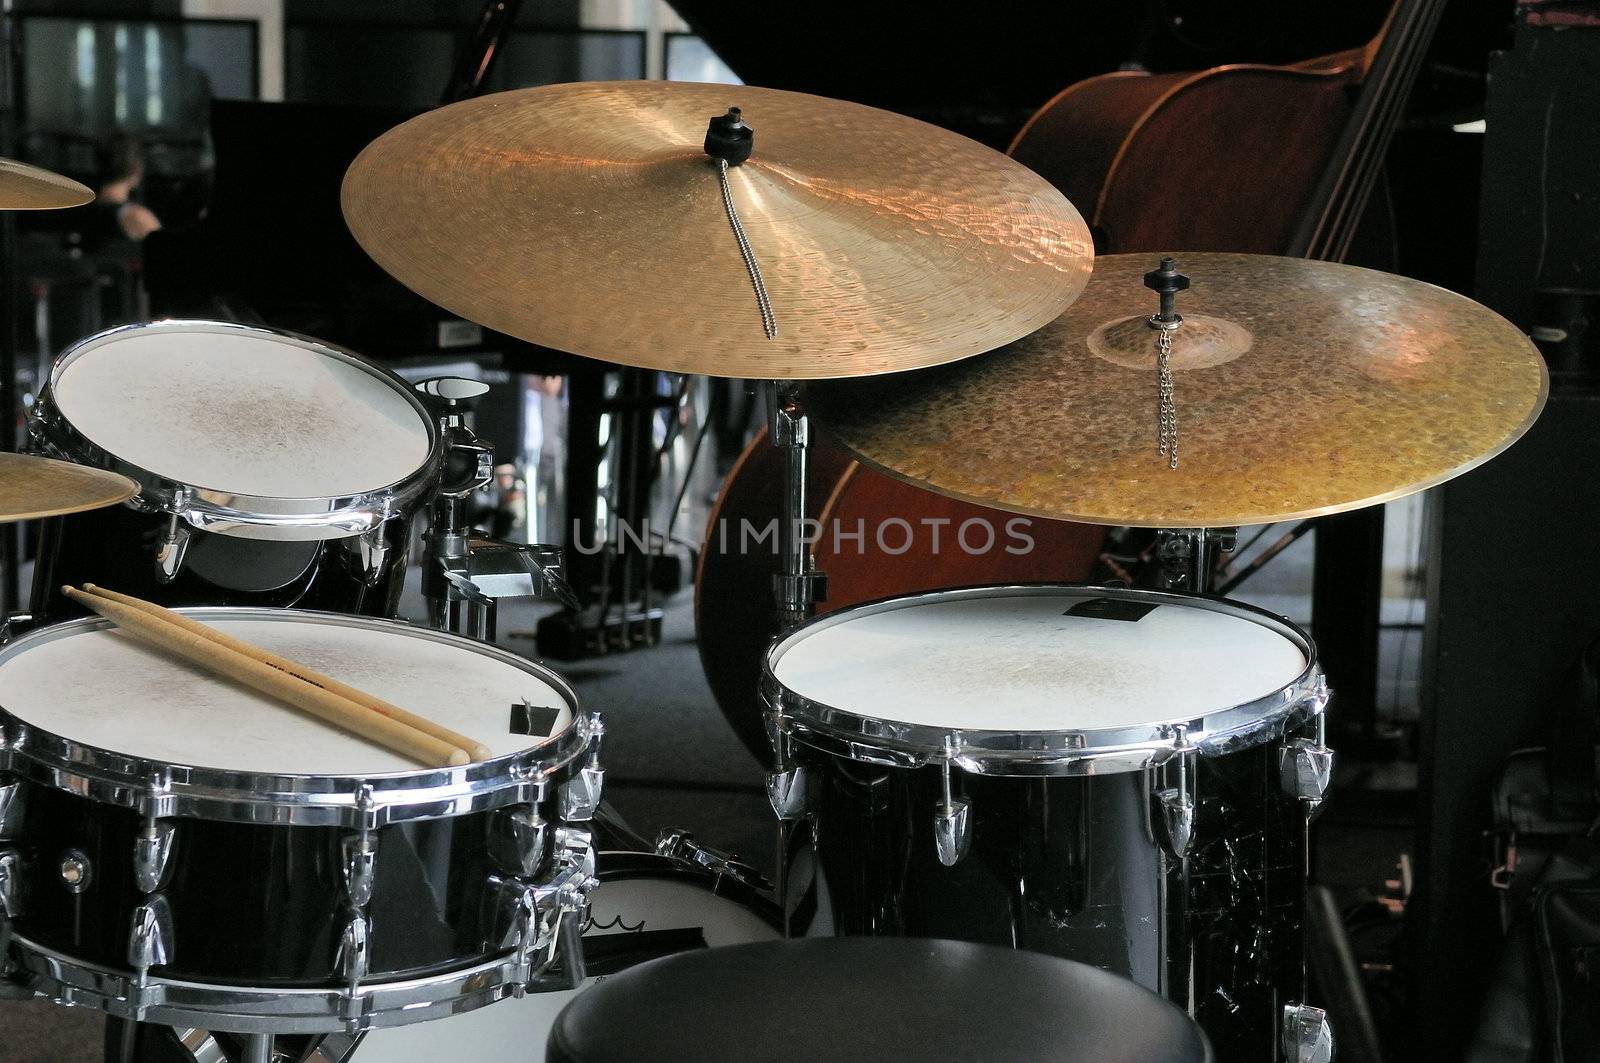 A drum waiting for a concert with various drums and percussion.